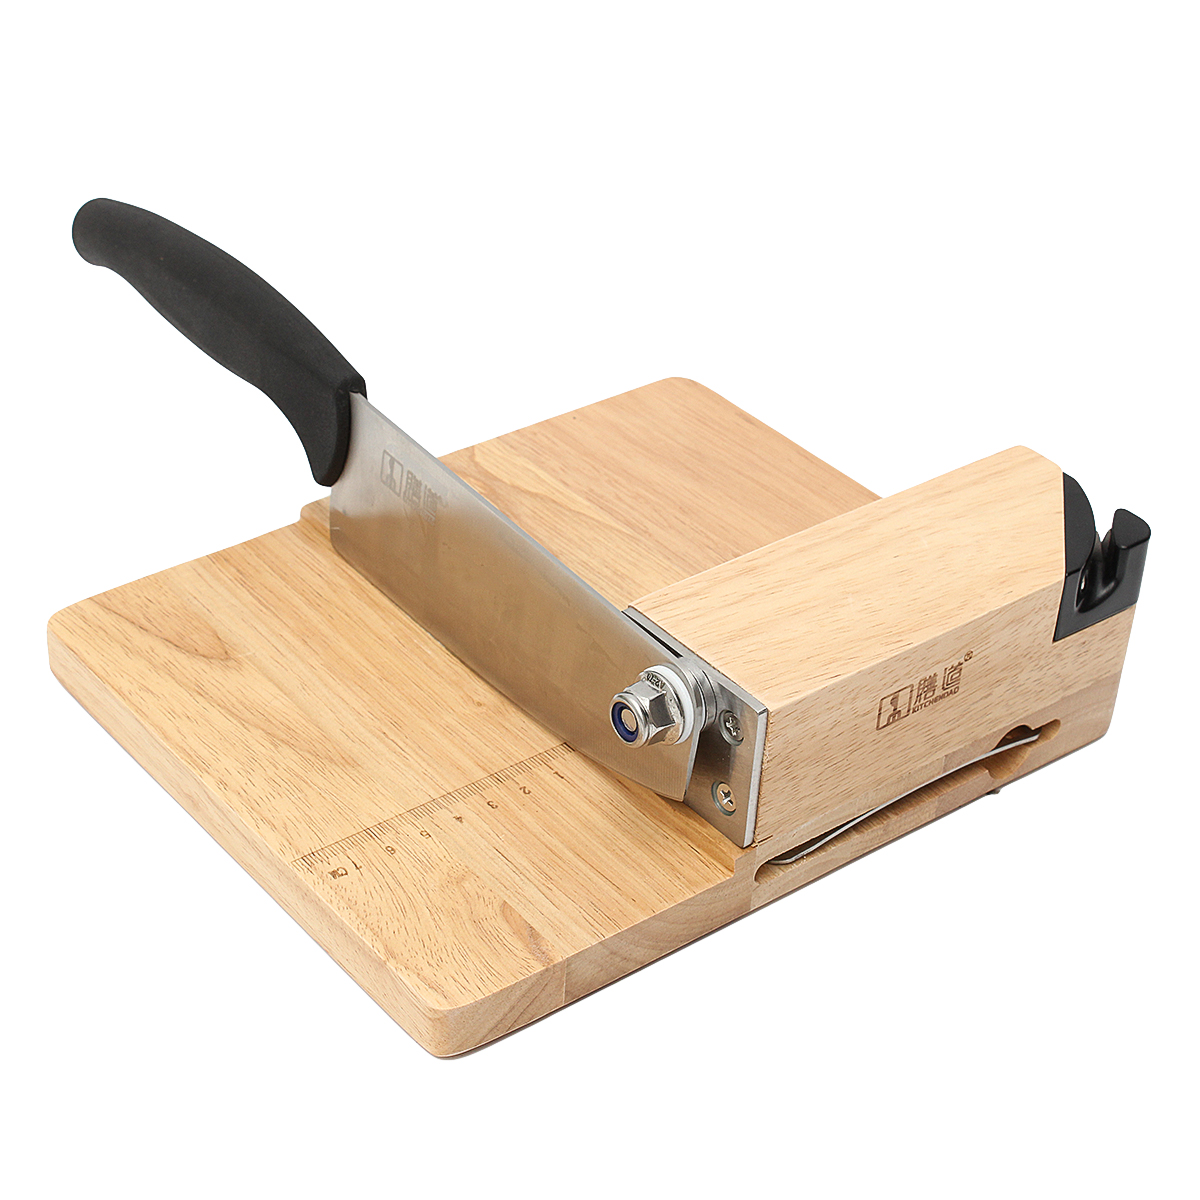 Biltong Cutter Jerky Slicer Knife Household Rice Cake Knife Meat Slicer Cutting Board Kitchen Tools Cooking Accessories